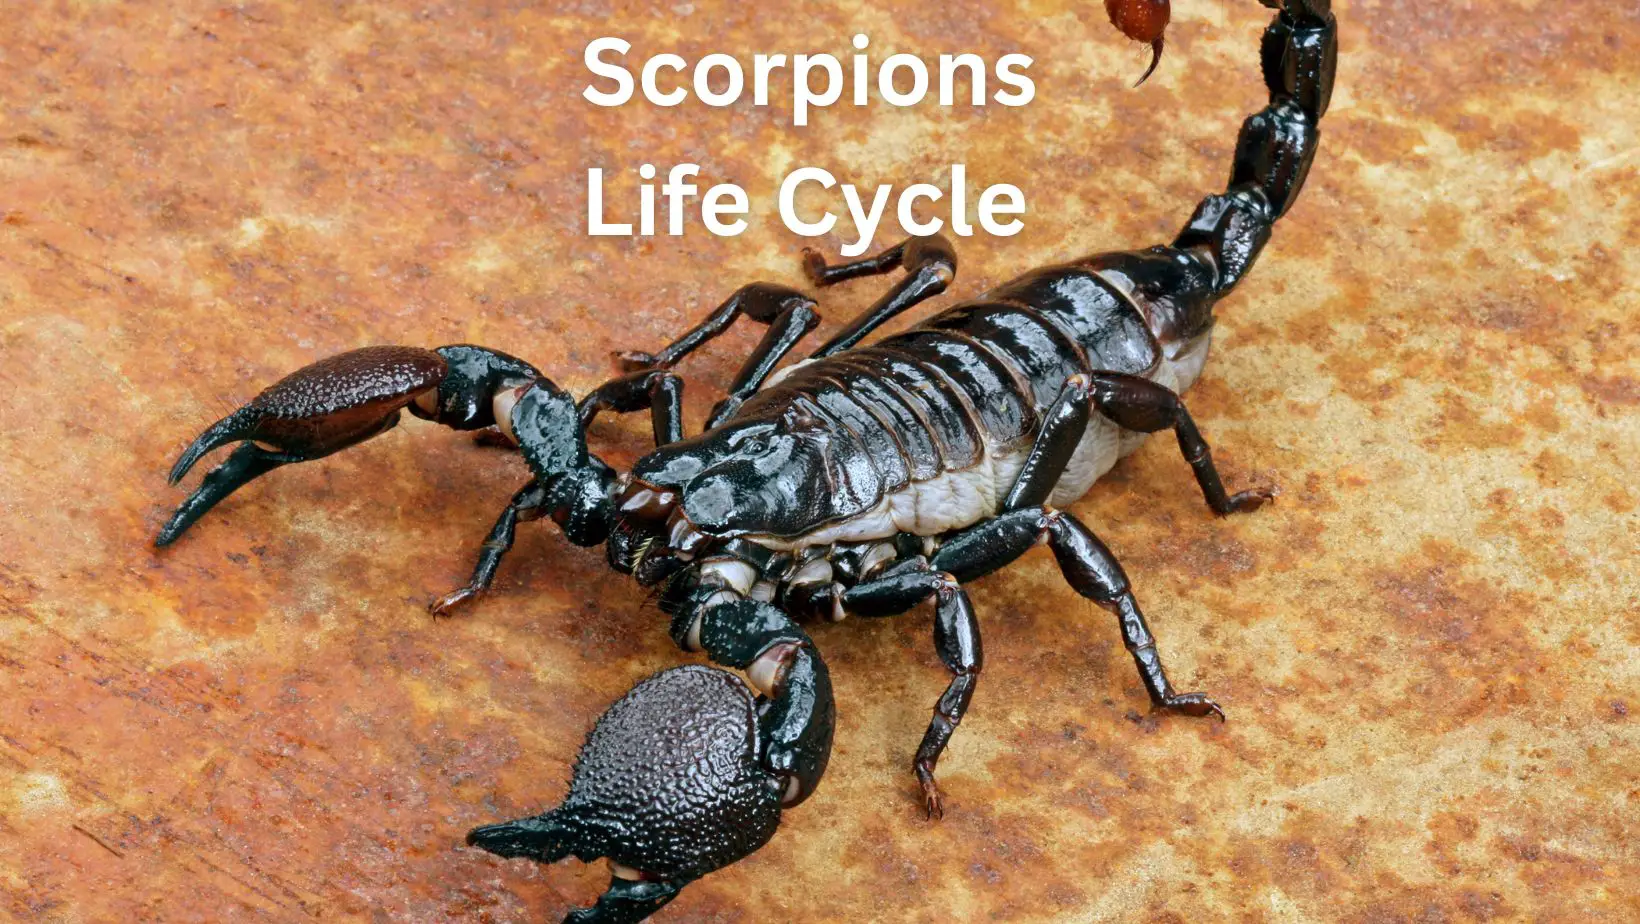 Scorpions Life Cycle